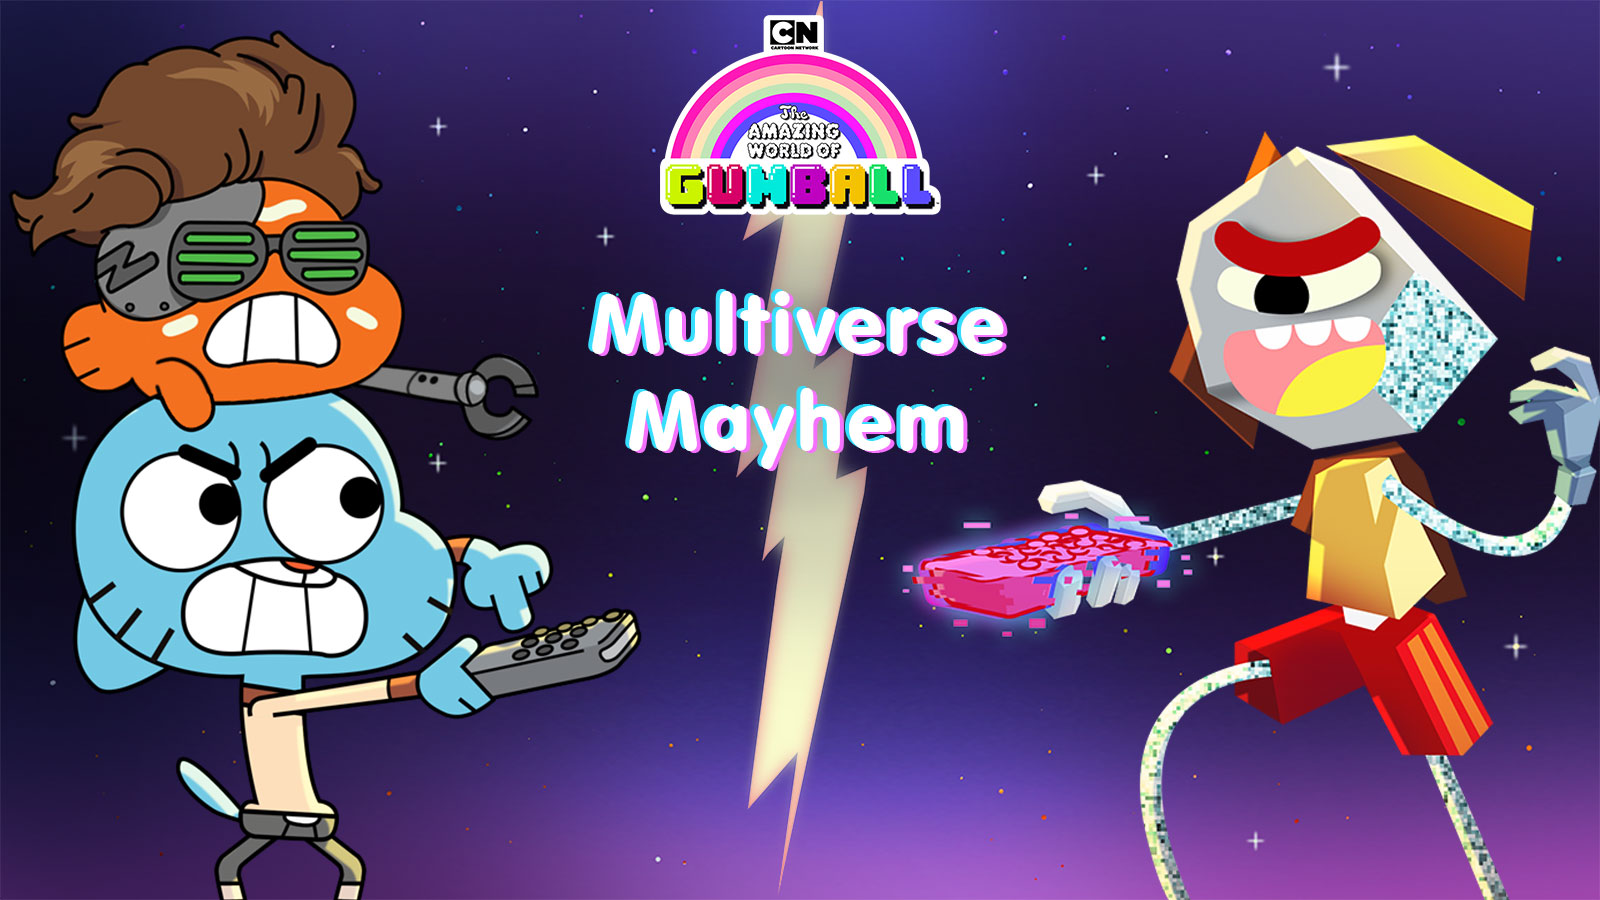 The Amazing World of Gumball, Play Free Online Games